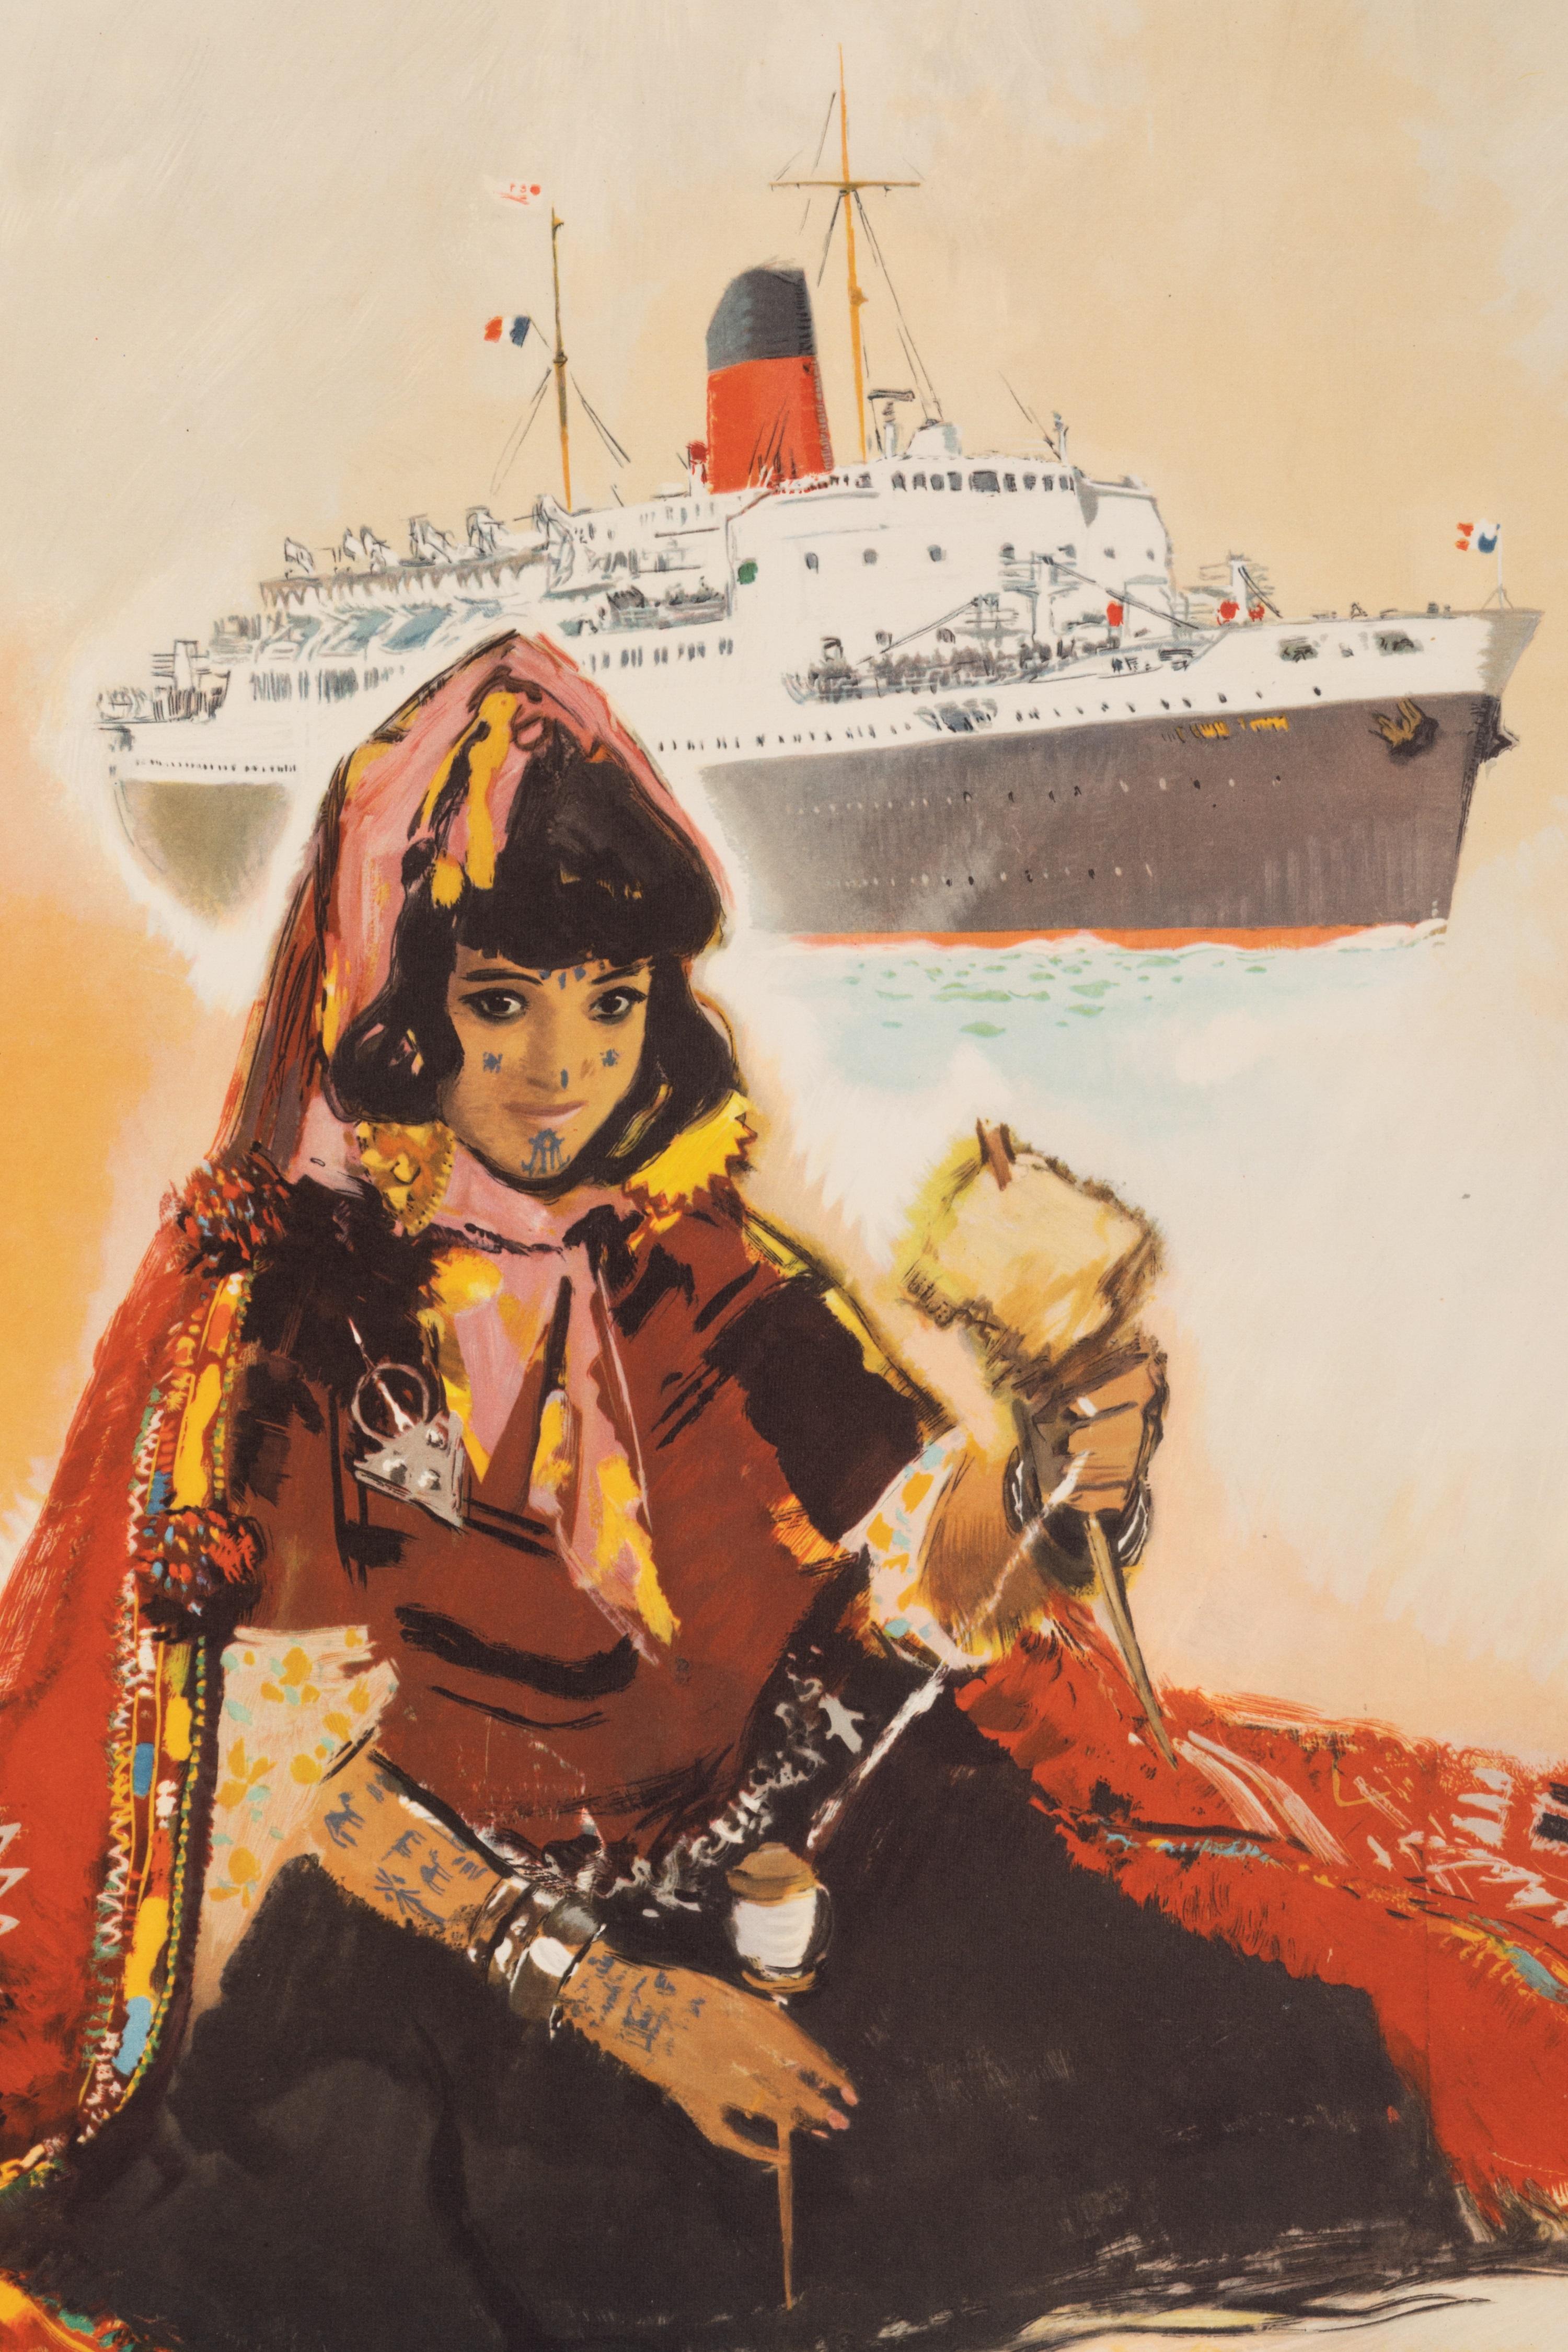 This poster was produced to promote tourism in the Maghreb, particularly in Tunisia via cruises by the Compagnie Générale Transatlantique. 

Artist : Albert Brenet (1903 - 2005)
Title : Compagnie Générale Transatlantique – Lignes de la Méditerranée